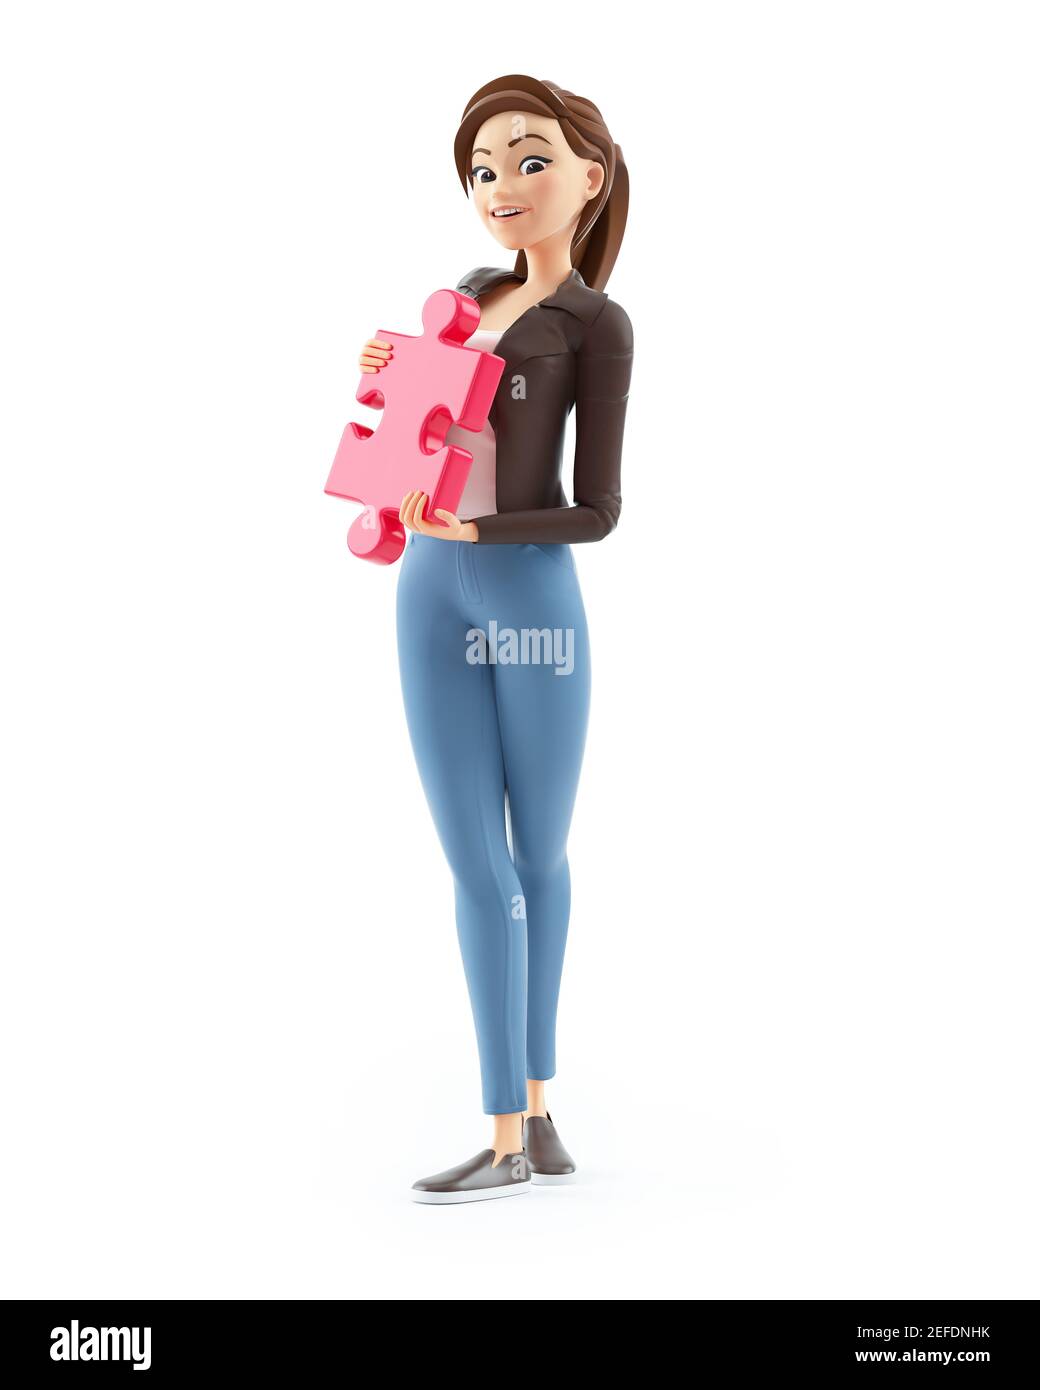 3d cartoon woman holding piece of puzzle, illustration isolated on white background Stock Photo